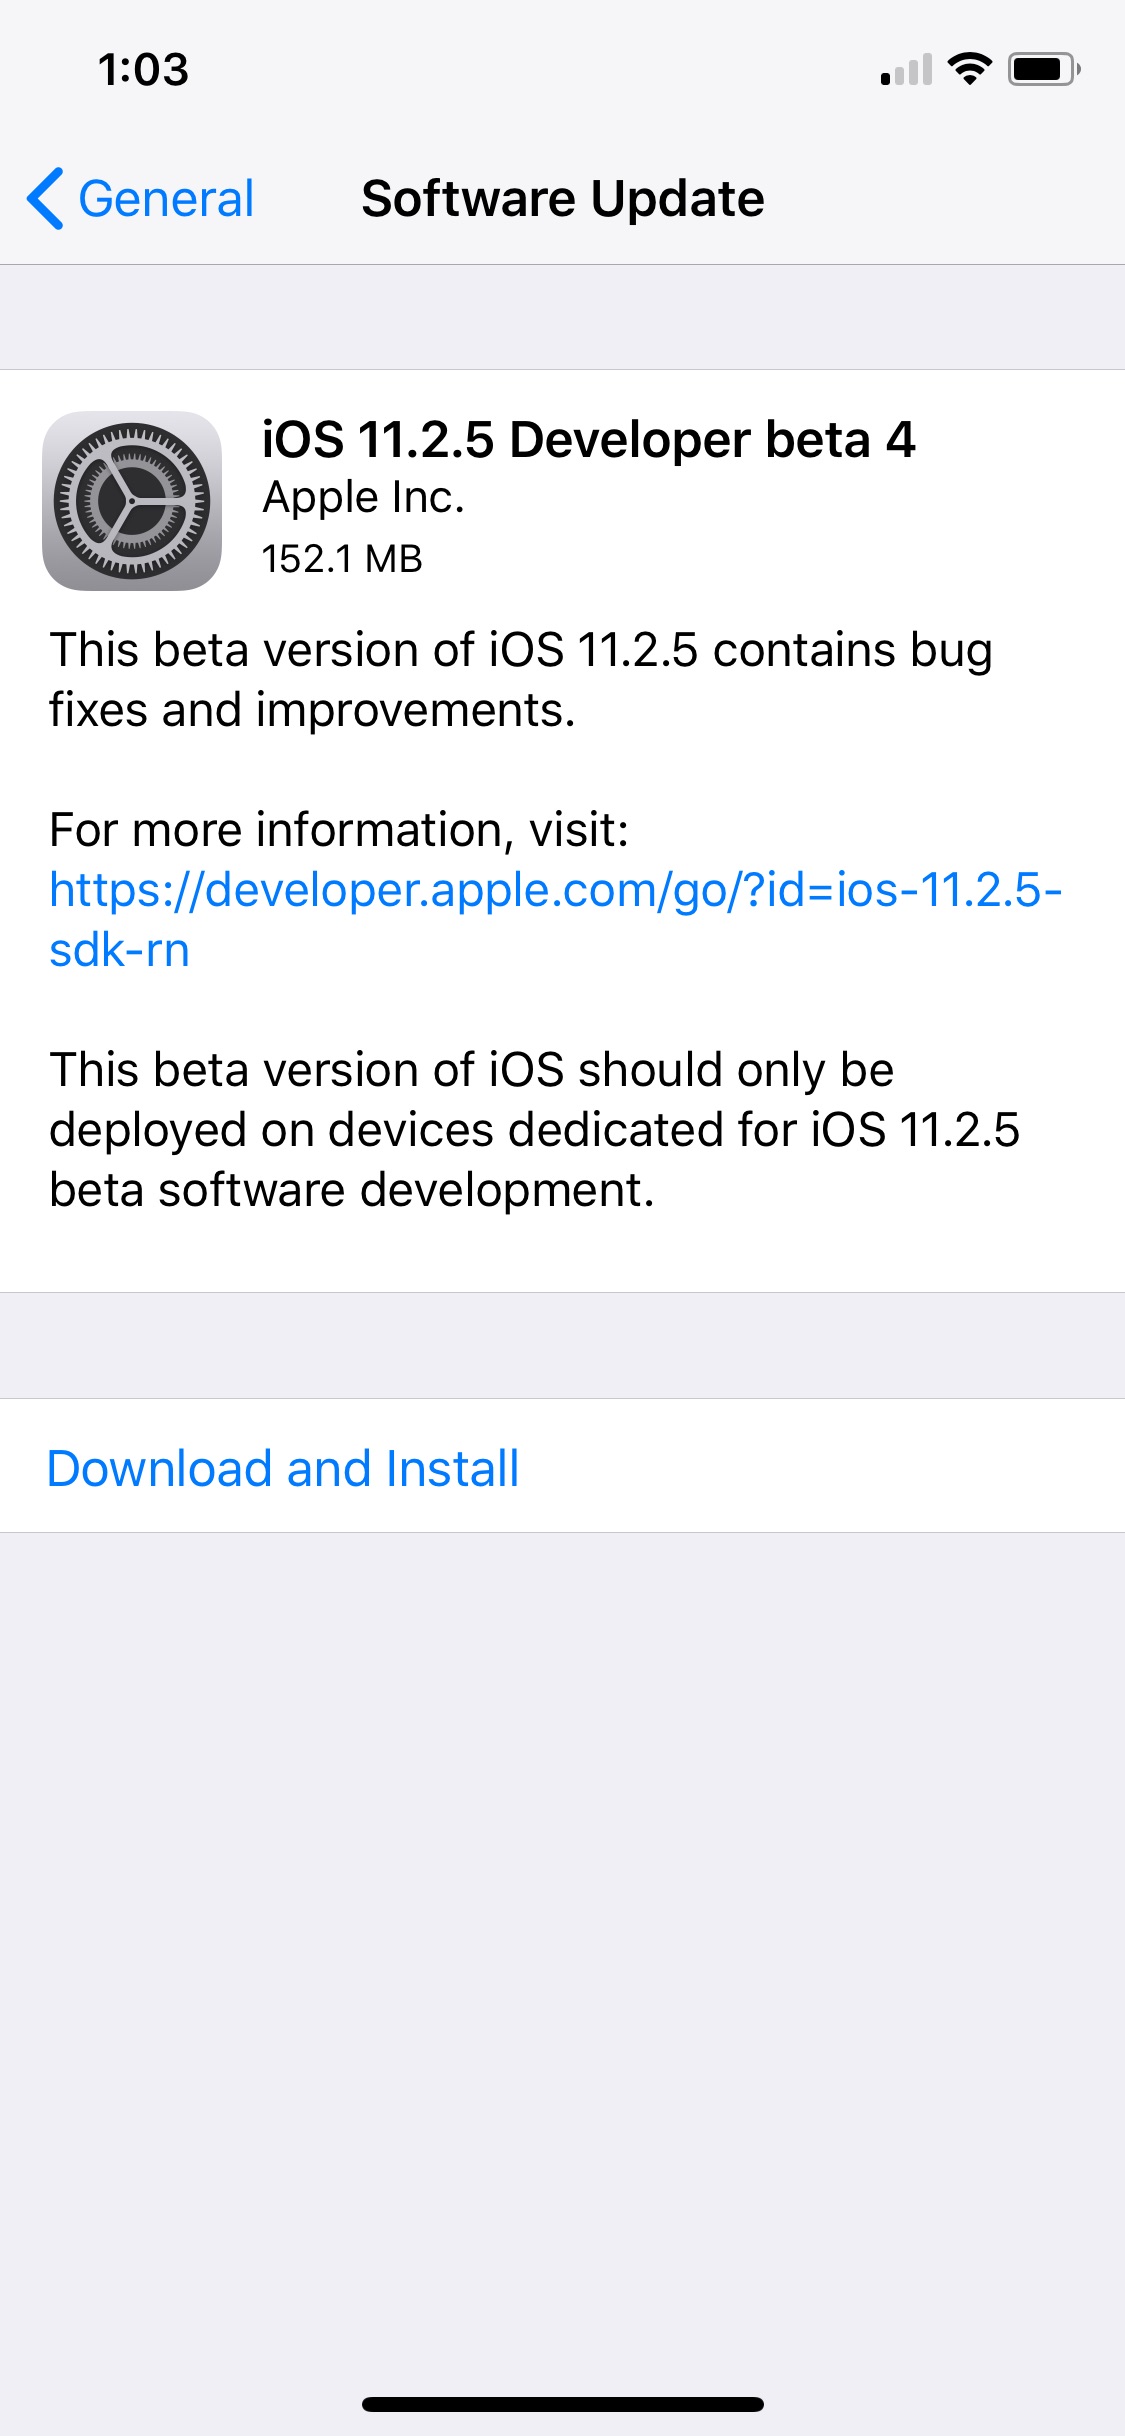 Apple Releases iOS 11.2.5 Beta 4 to Developers [Download]